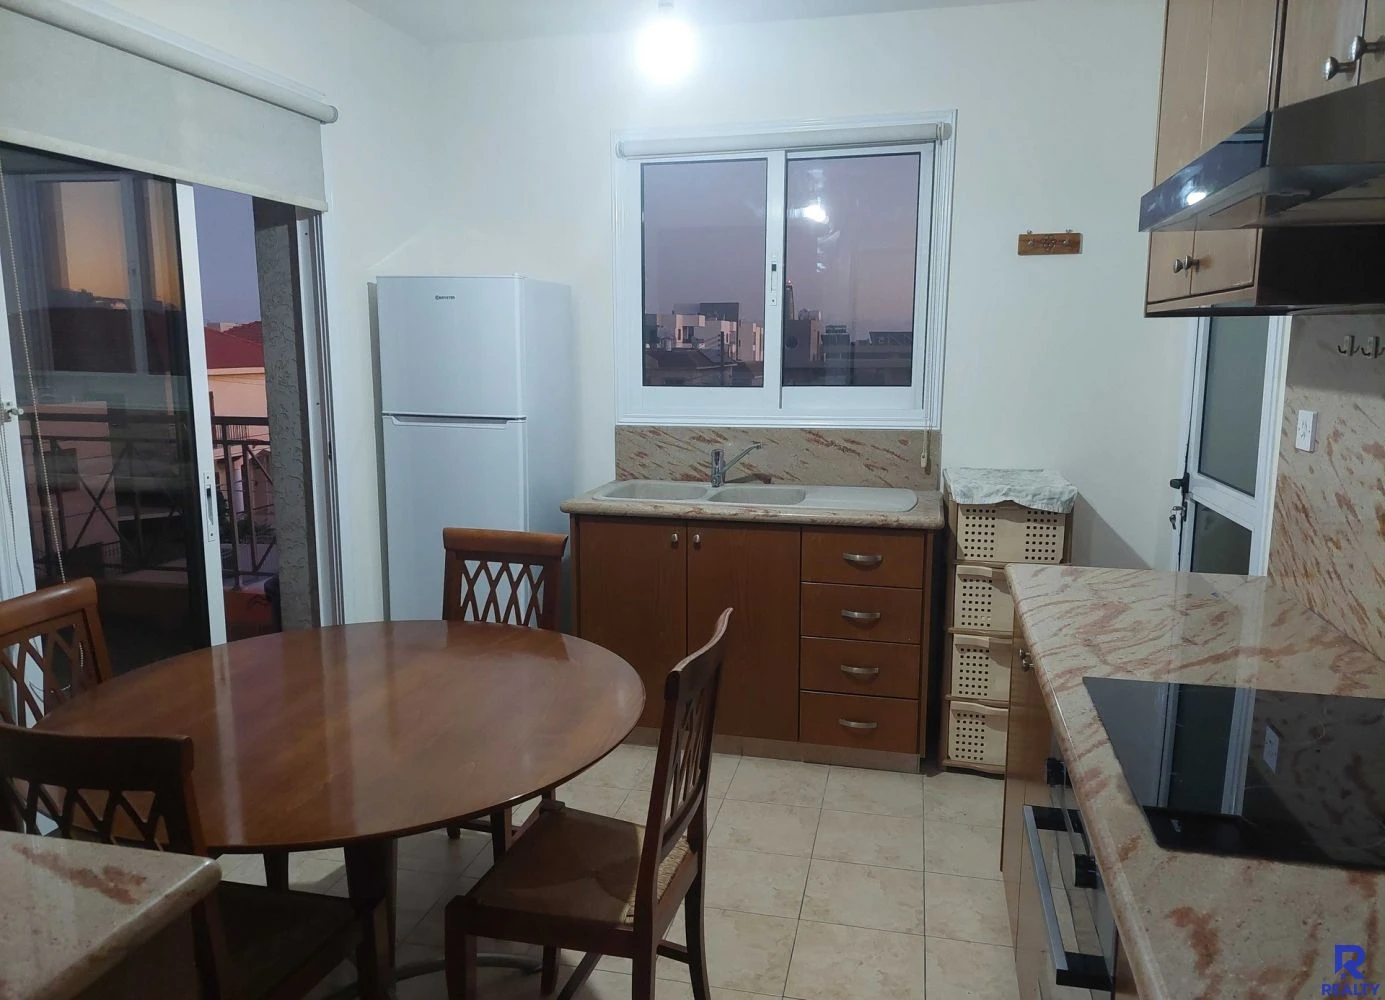 2-bedroom apartment to rent, image 1